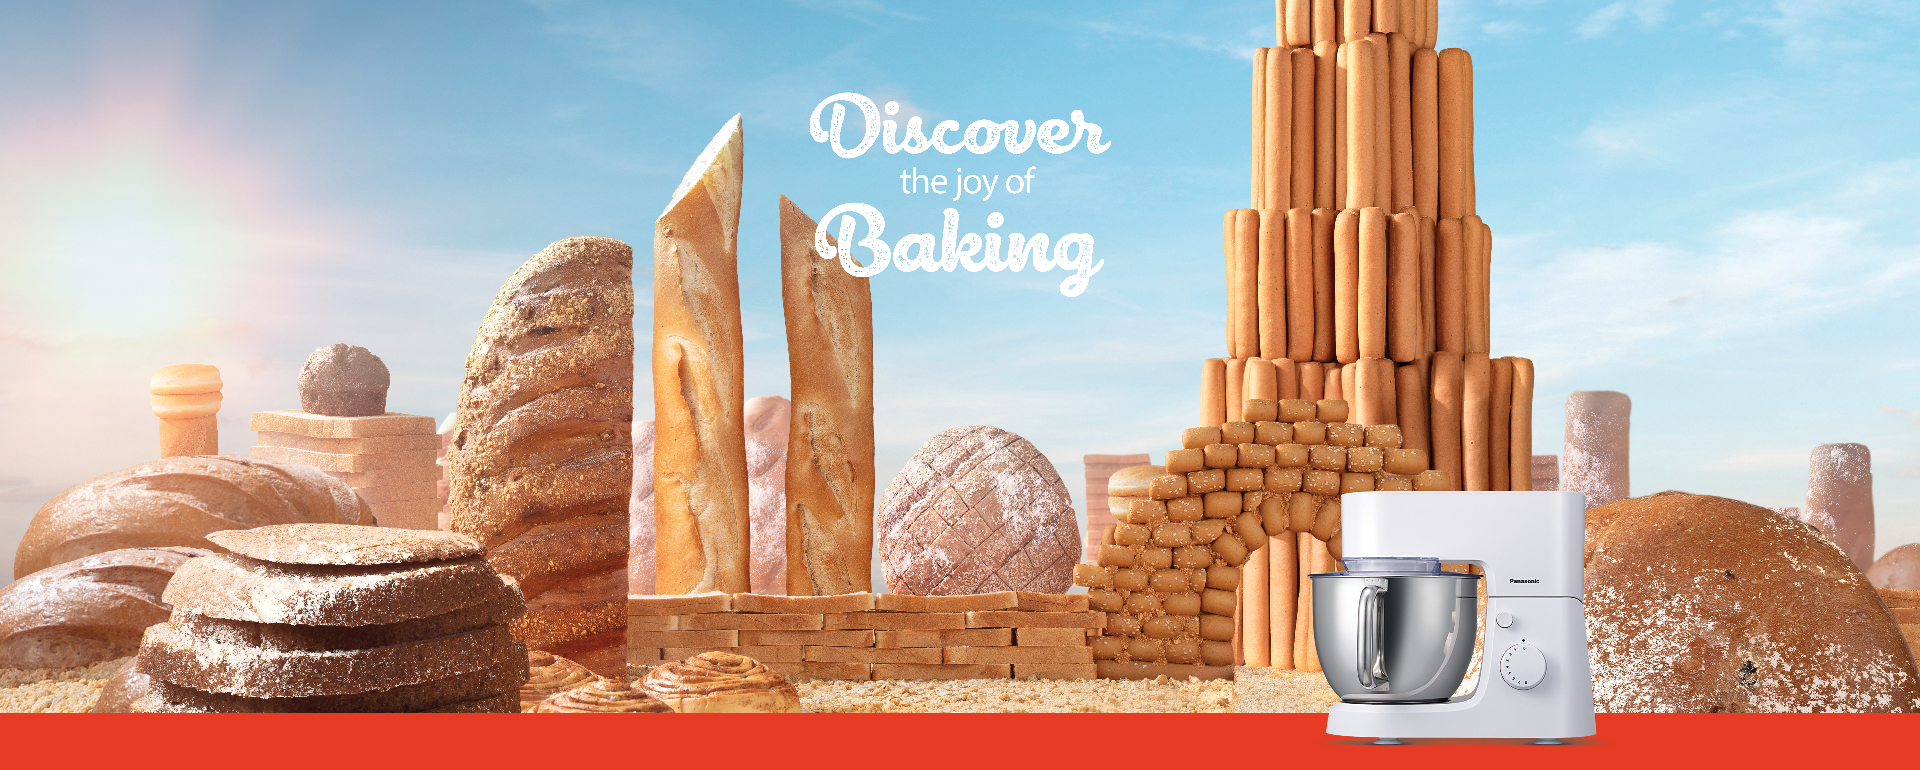 Discover the Joy of Baking